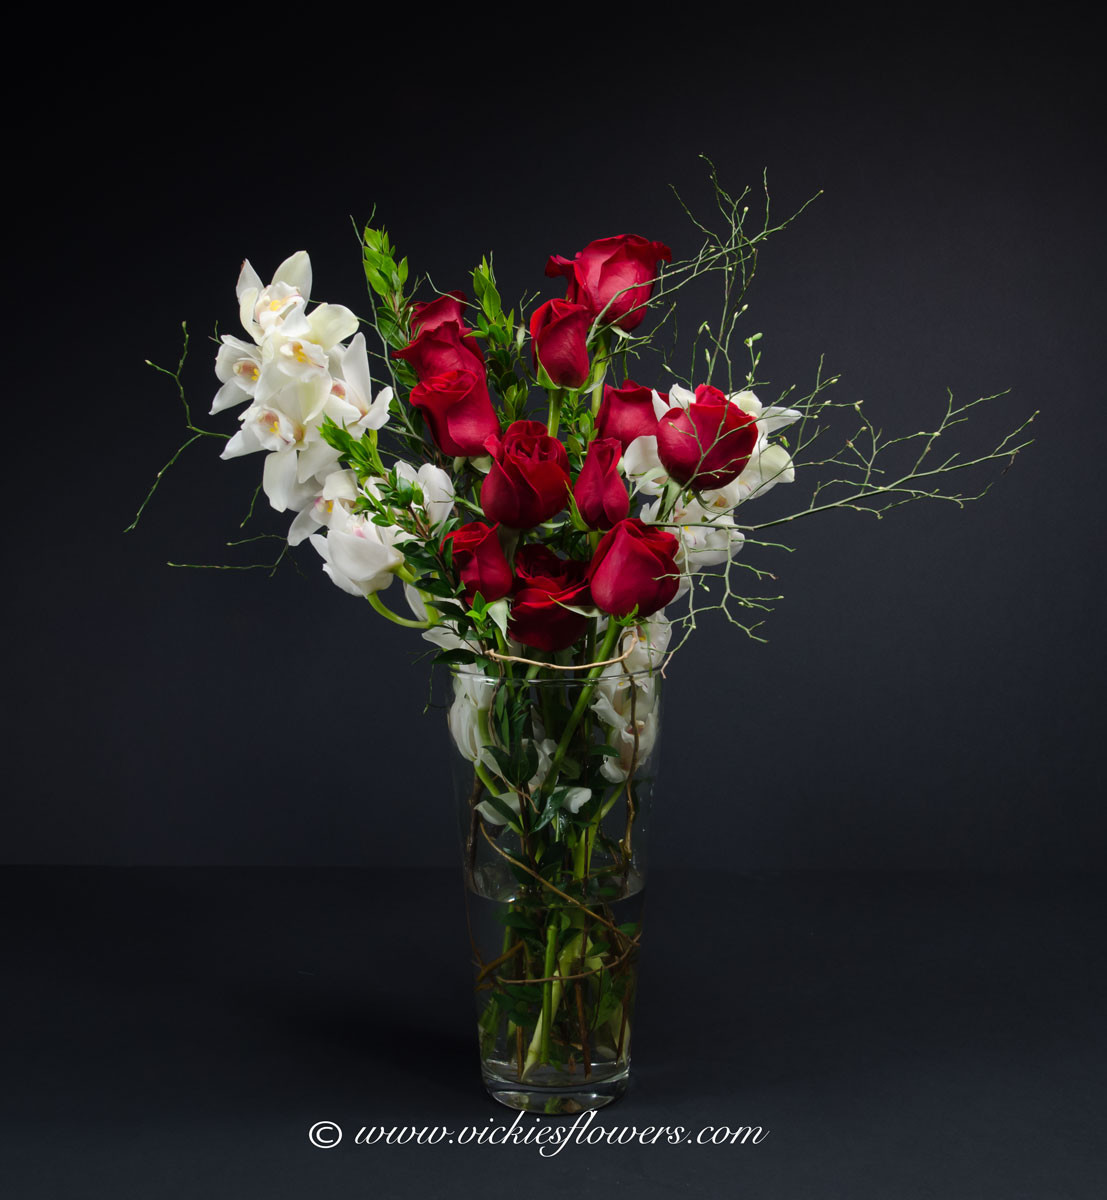 10 Lovable Large Red Vase 2024 free download large red vase of simple flower arrangements for tall vases flowers healthy throughout bouquet 035 140 plus tax and delivery large bouquet of red roses and white cymbidium orchids in tall cy